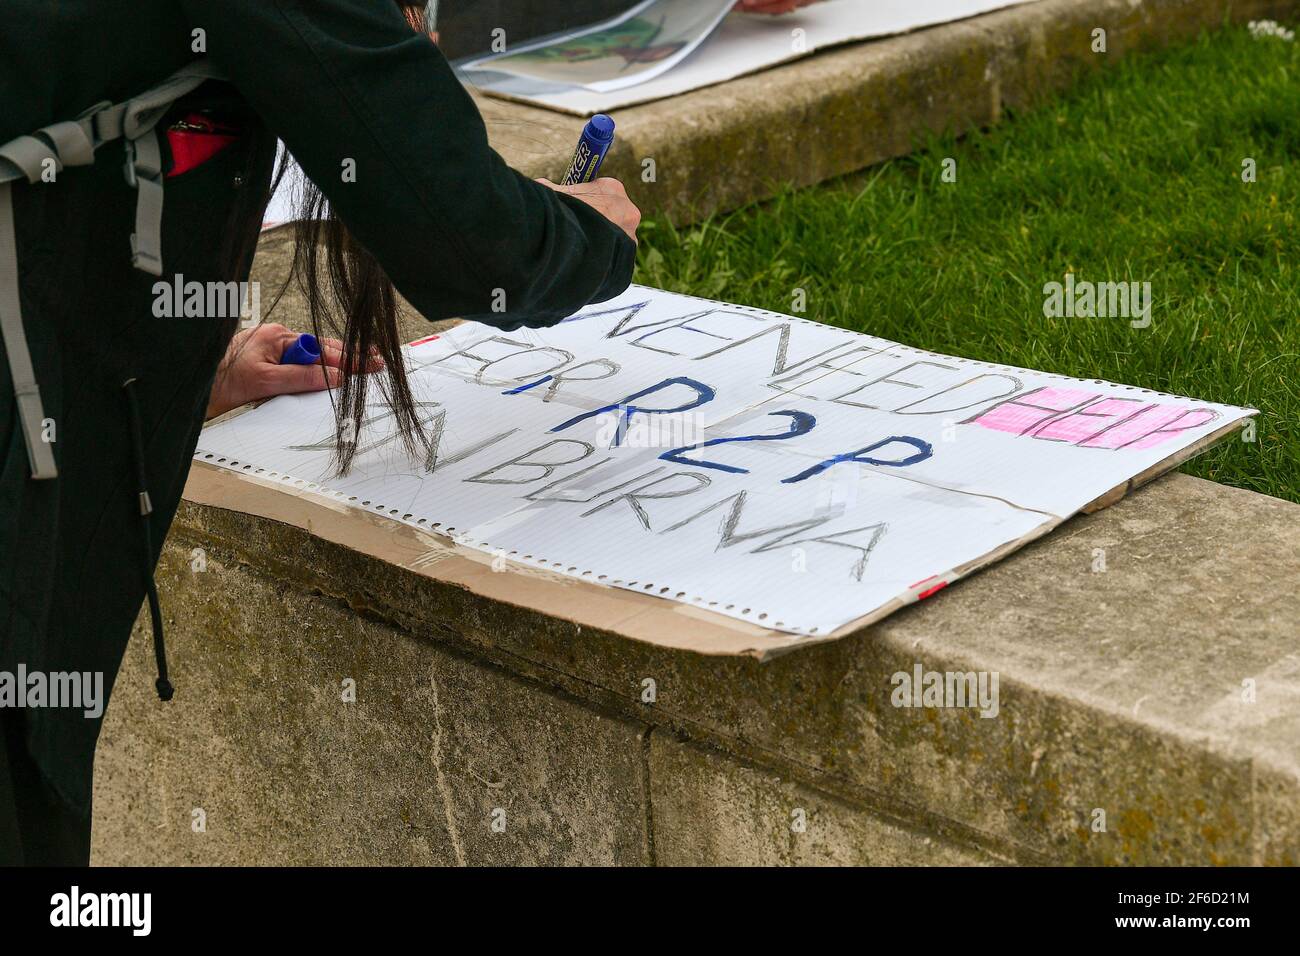 London, UK. 31st Mar, 2021. A protest against the military regime in Myanmar outside the Houses of Parliament Credit: Ian Davidson/Alamy Live News Stock Photo